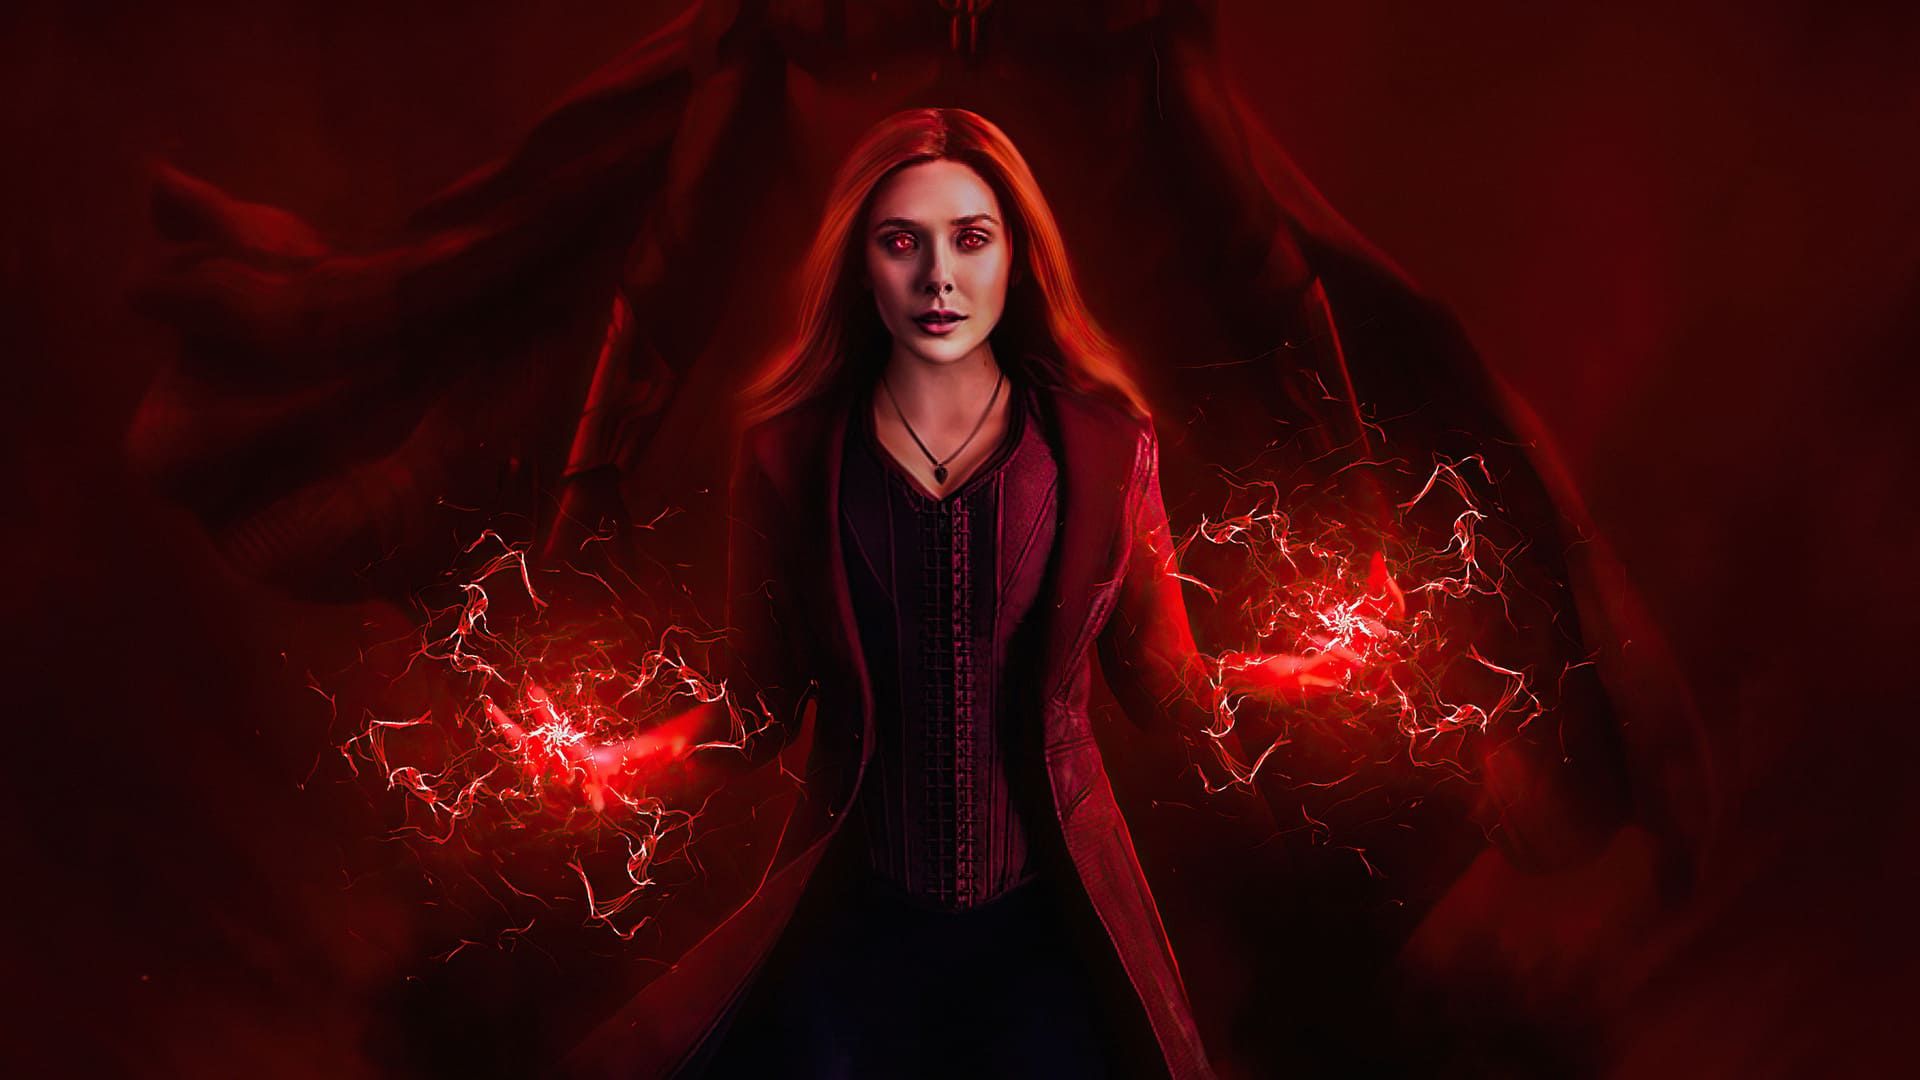 The image of a woman with red hair and holding two daggers - Witch